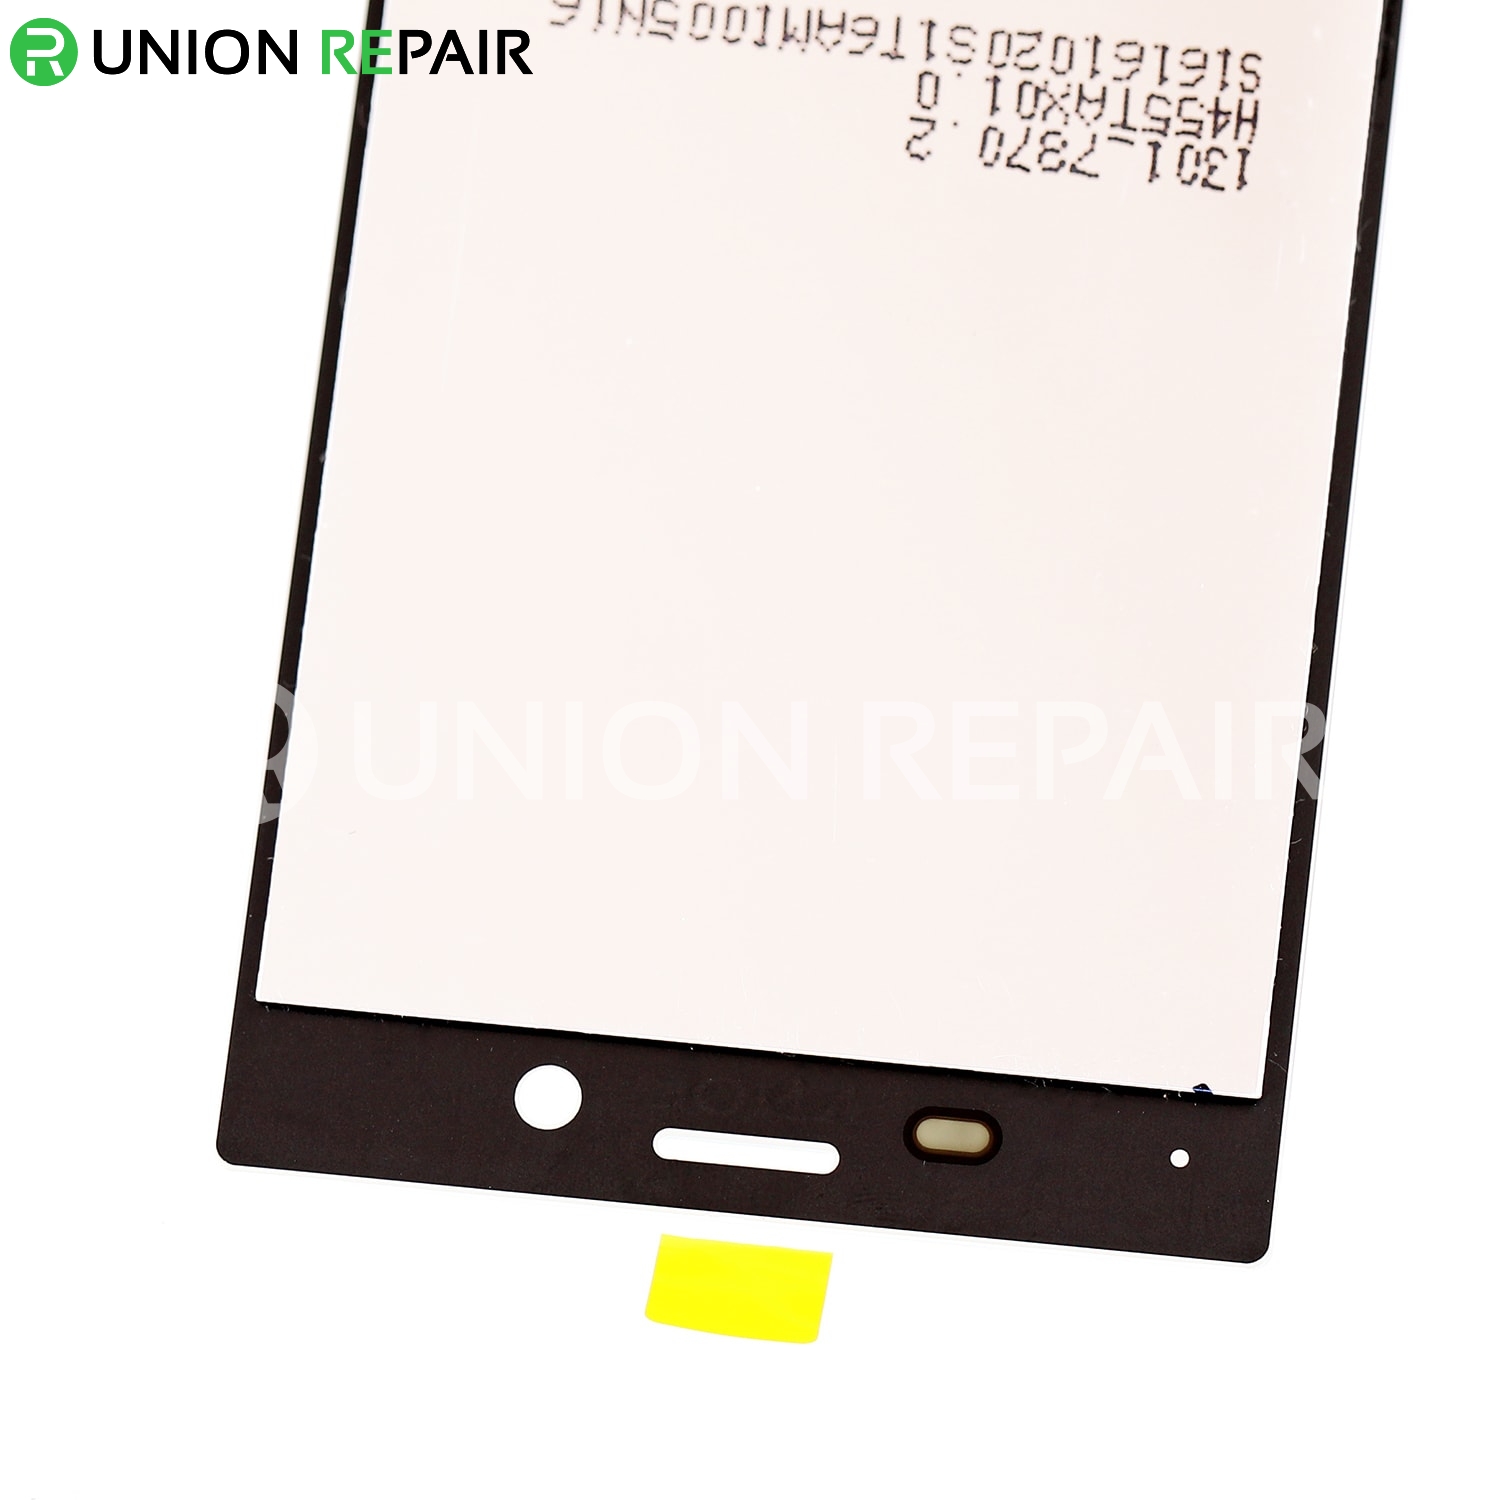 Replacement for Sony Xperia X Compact/Mini LCD Screen with Digitizer Assembly - White